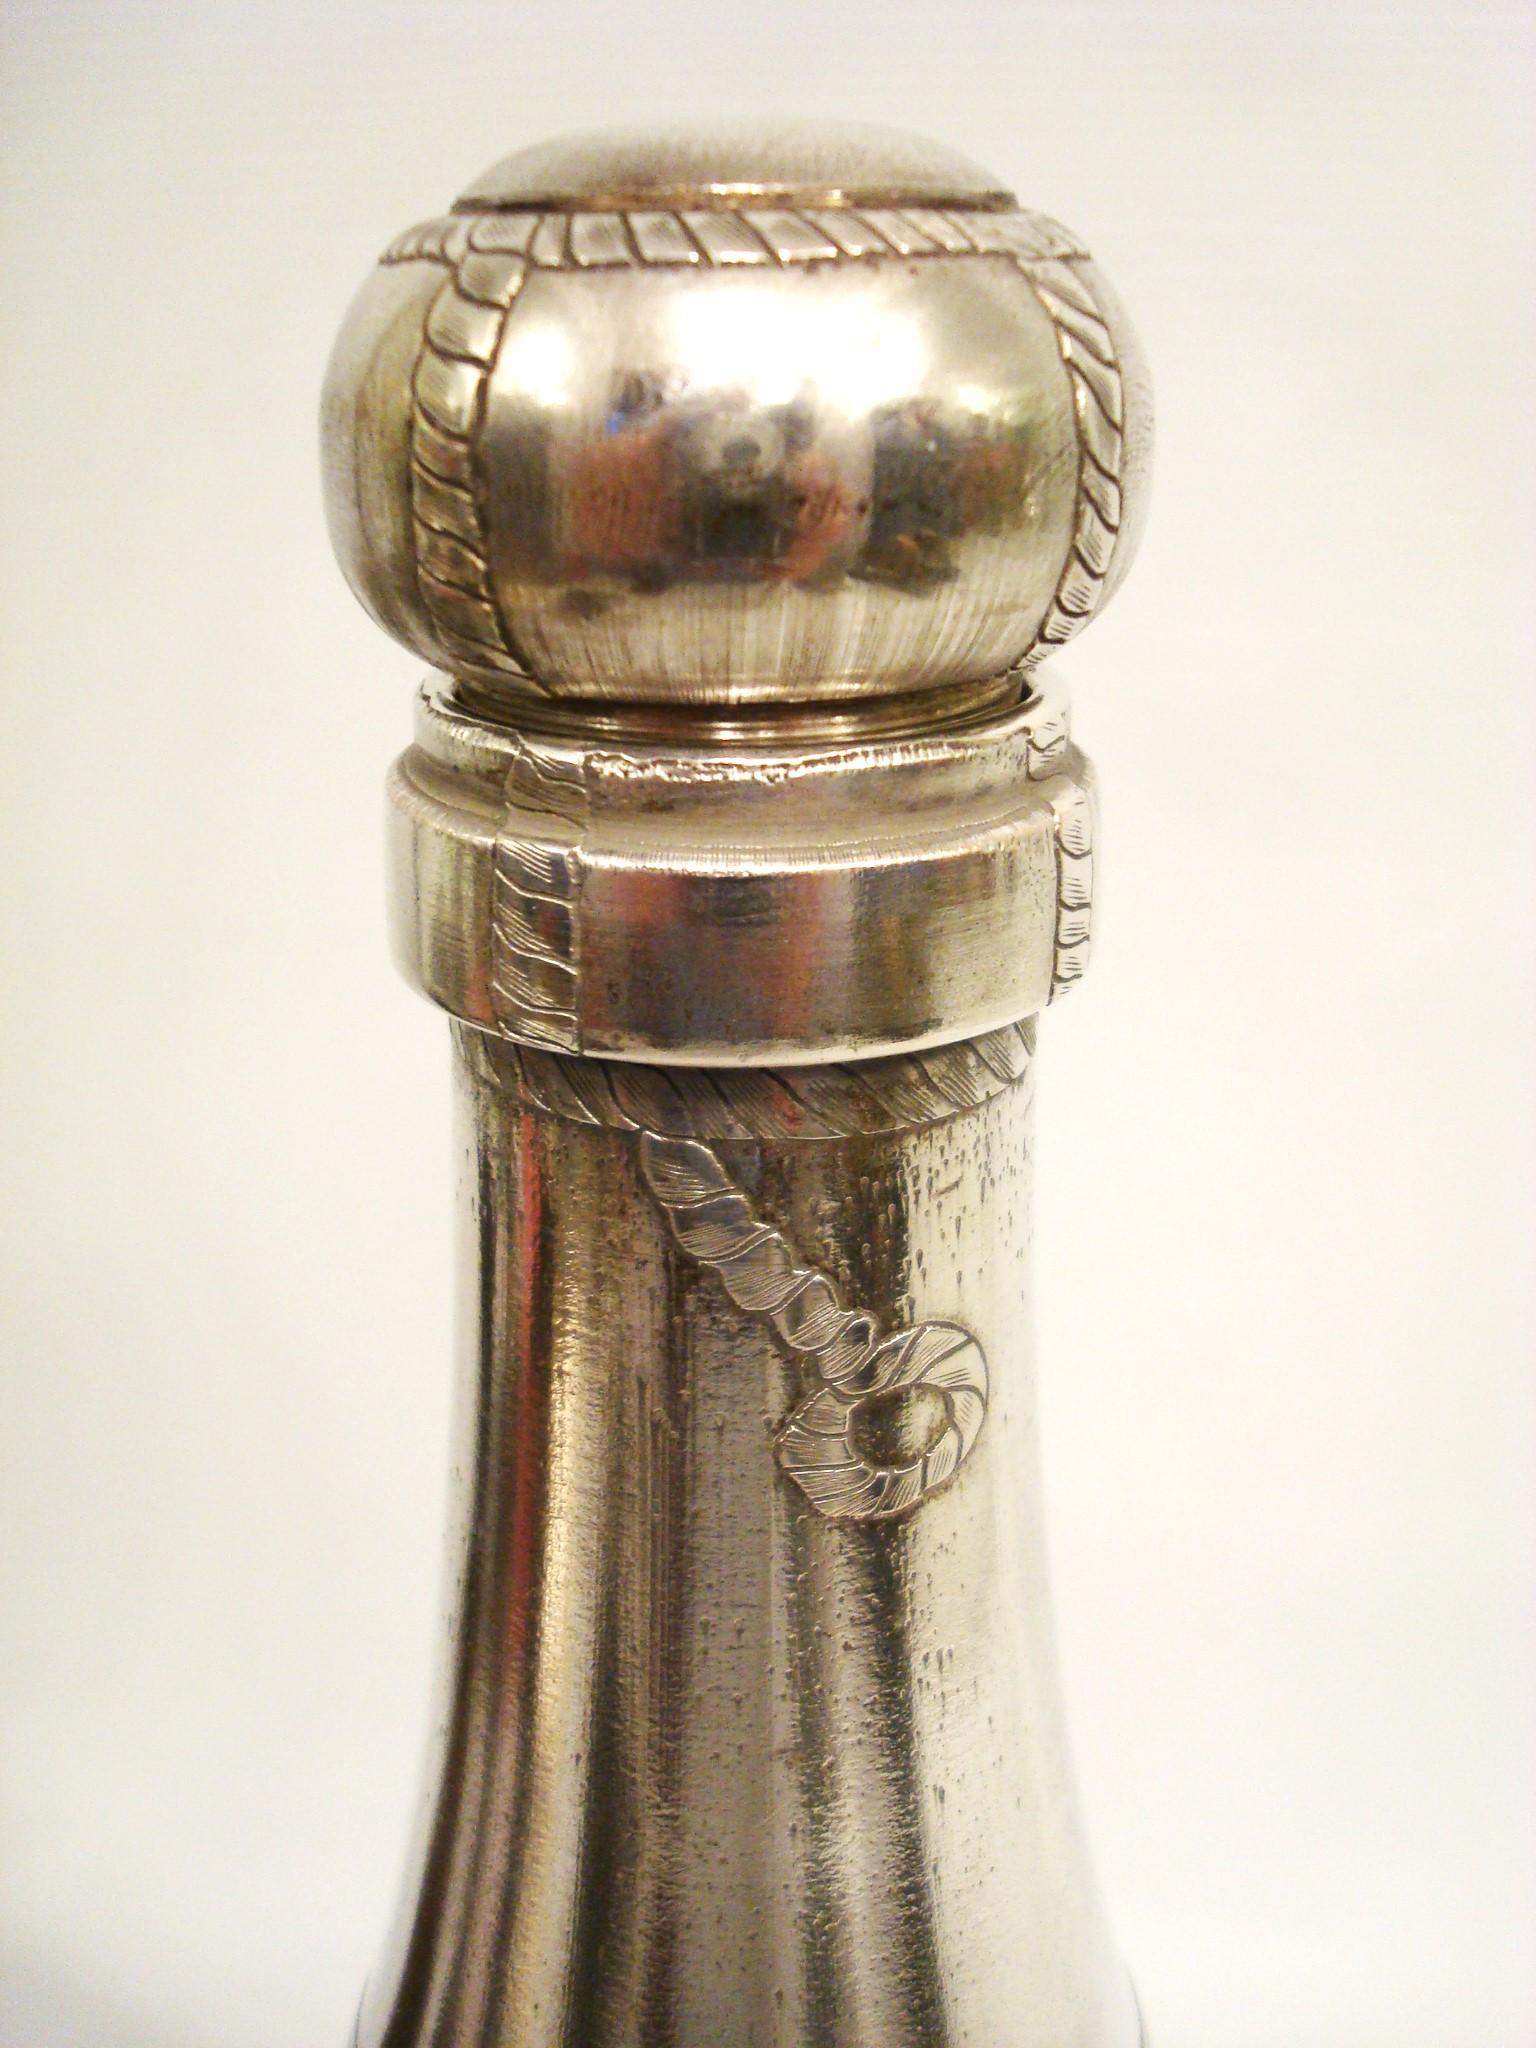 Art Deco Rare Silvered Champagne Bottle Cocktail Shaker. France 1930´s.

A rare silver plated Champagne bottle cocktail shaker with engraved label, foil and cork wire detail. The Shaker separates in just below the shoulder to fill with ice and